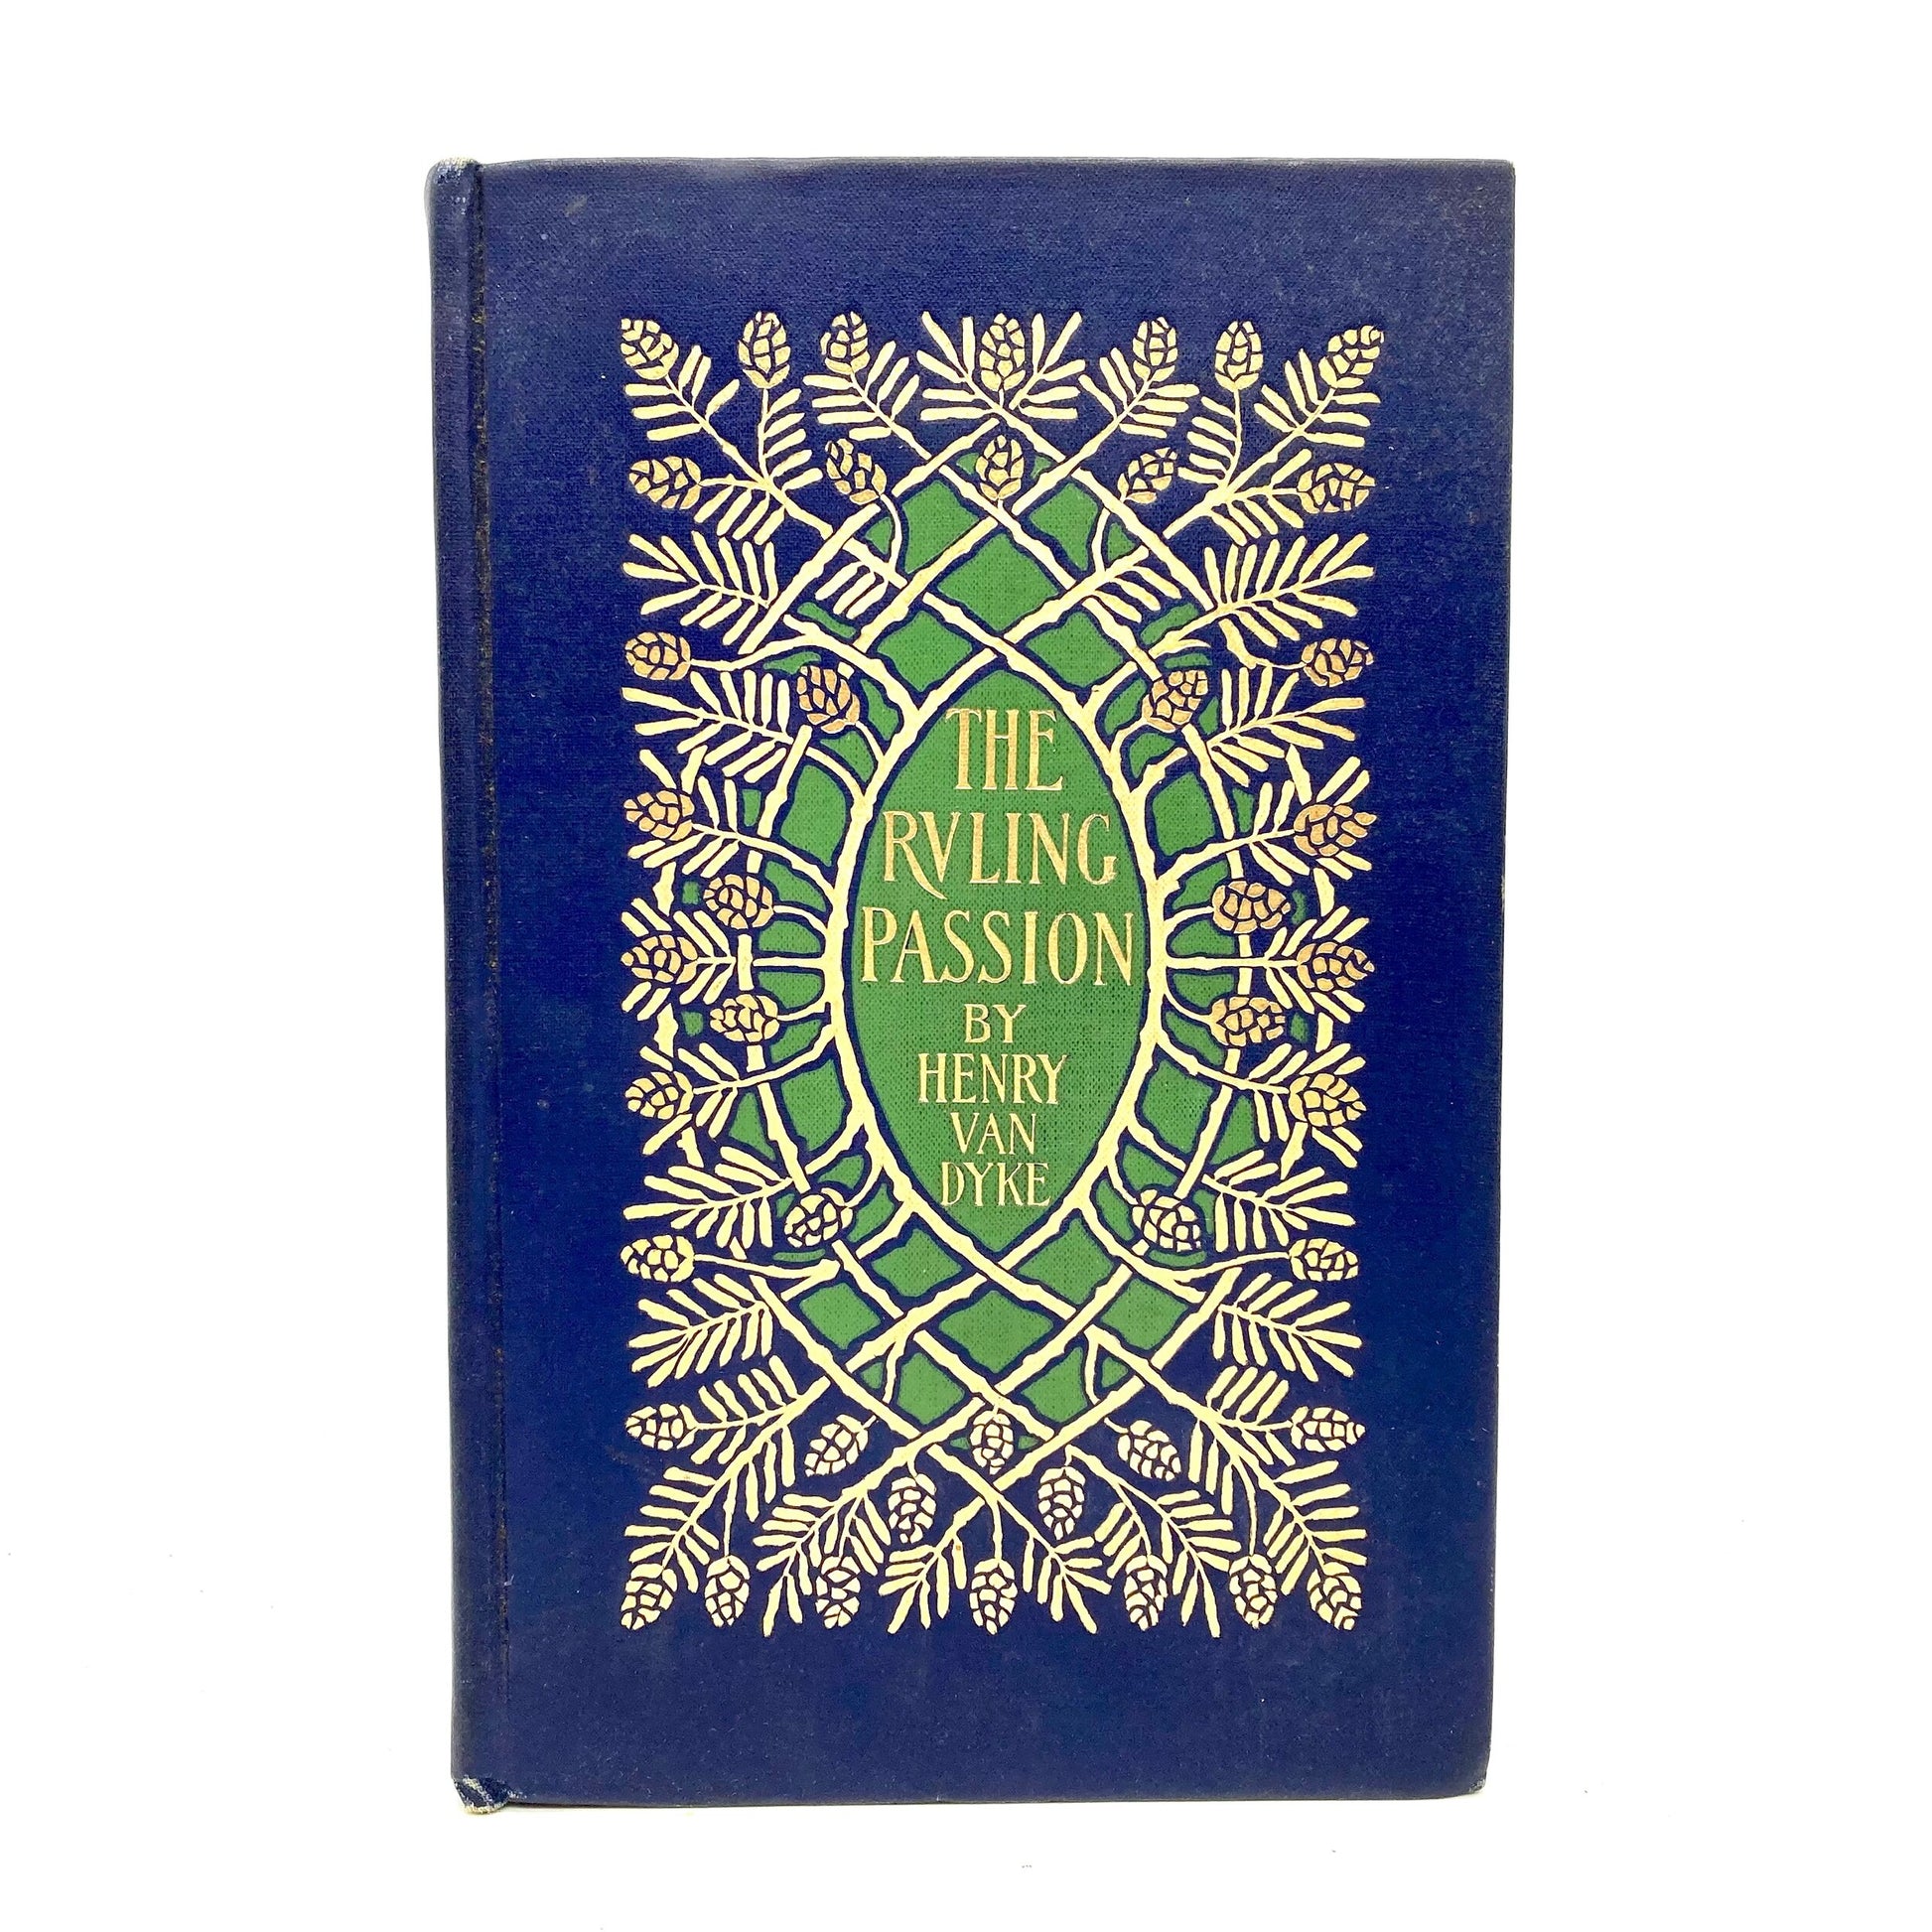 VAN DYKE, Henry "The Ruling Passion" [Scribners, 1901] - Buzz Bookstore